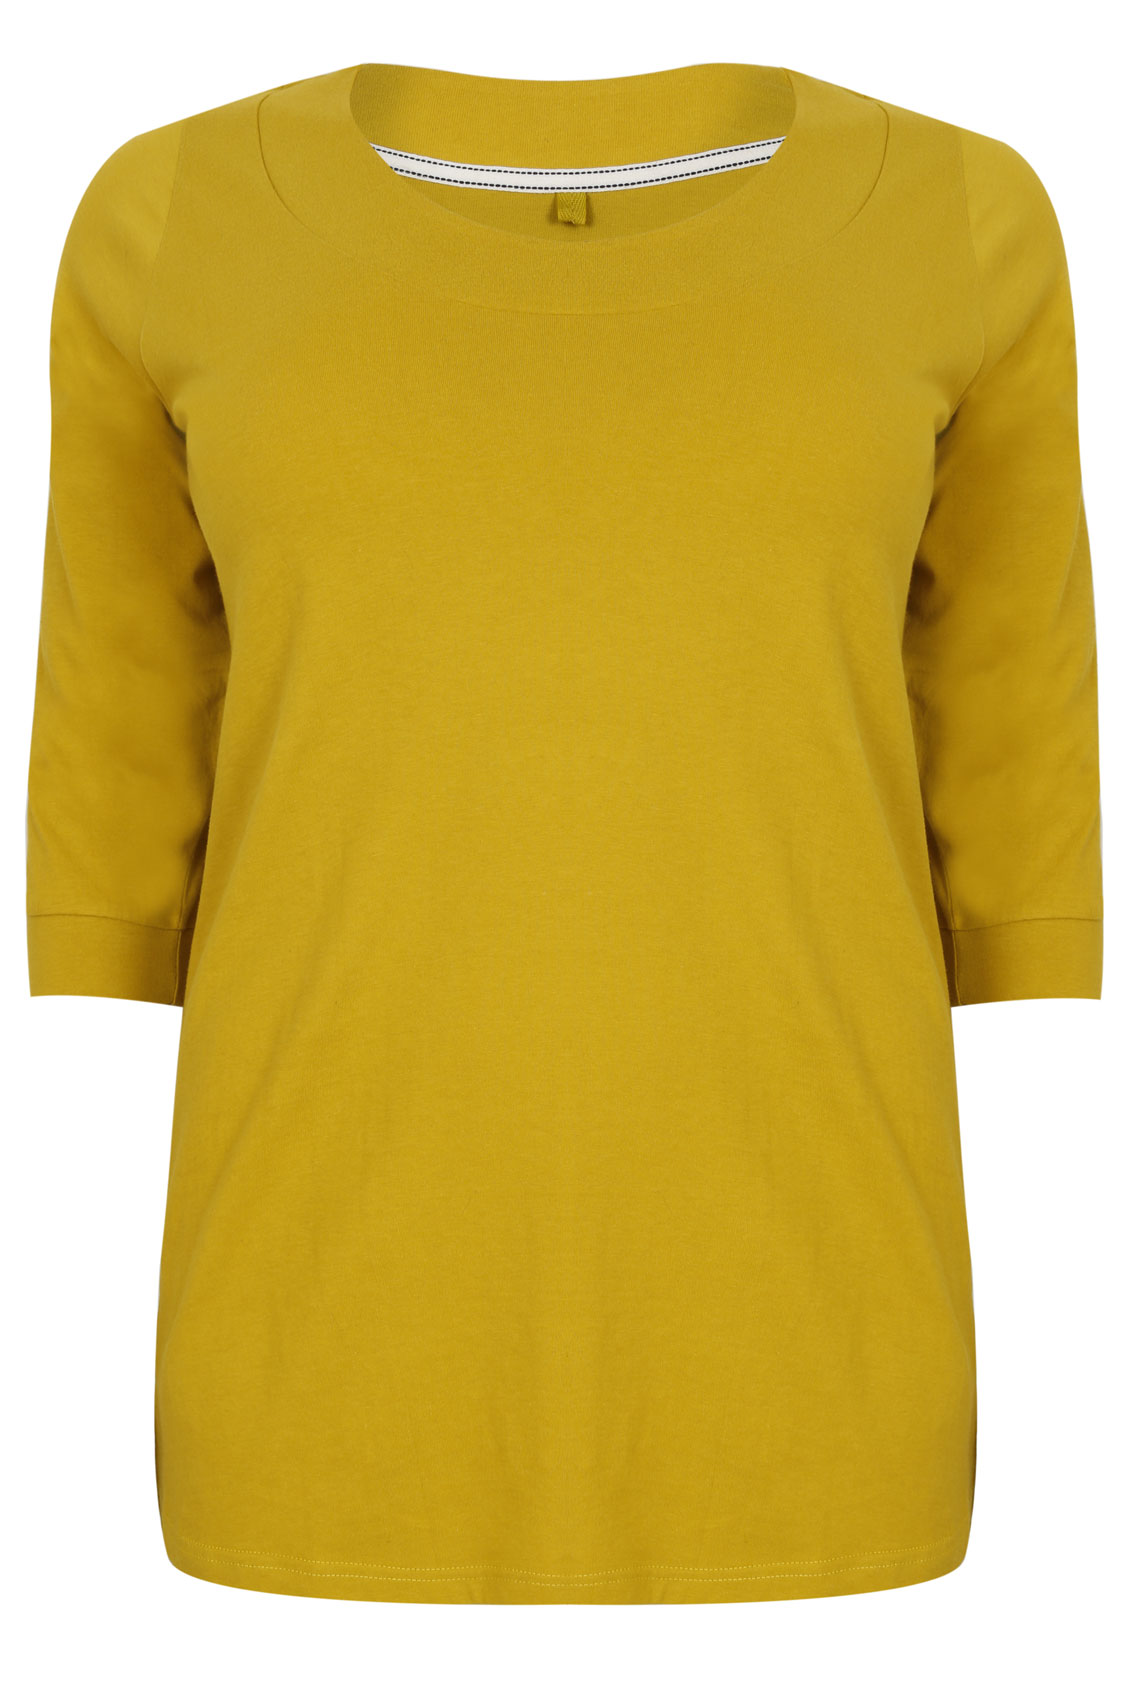 Chartreuse Band Scoop Neckline T-Shirt With 3/4 Sleeves